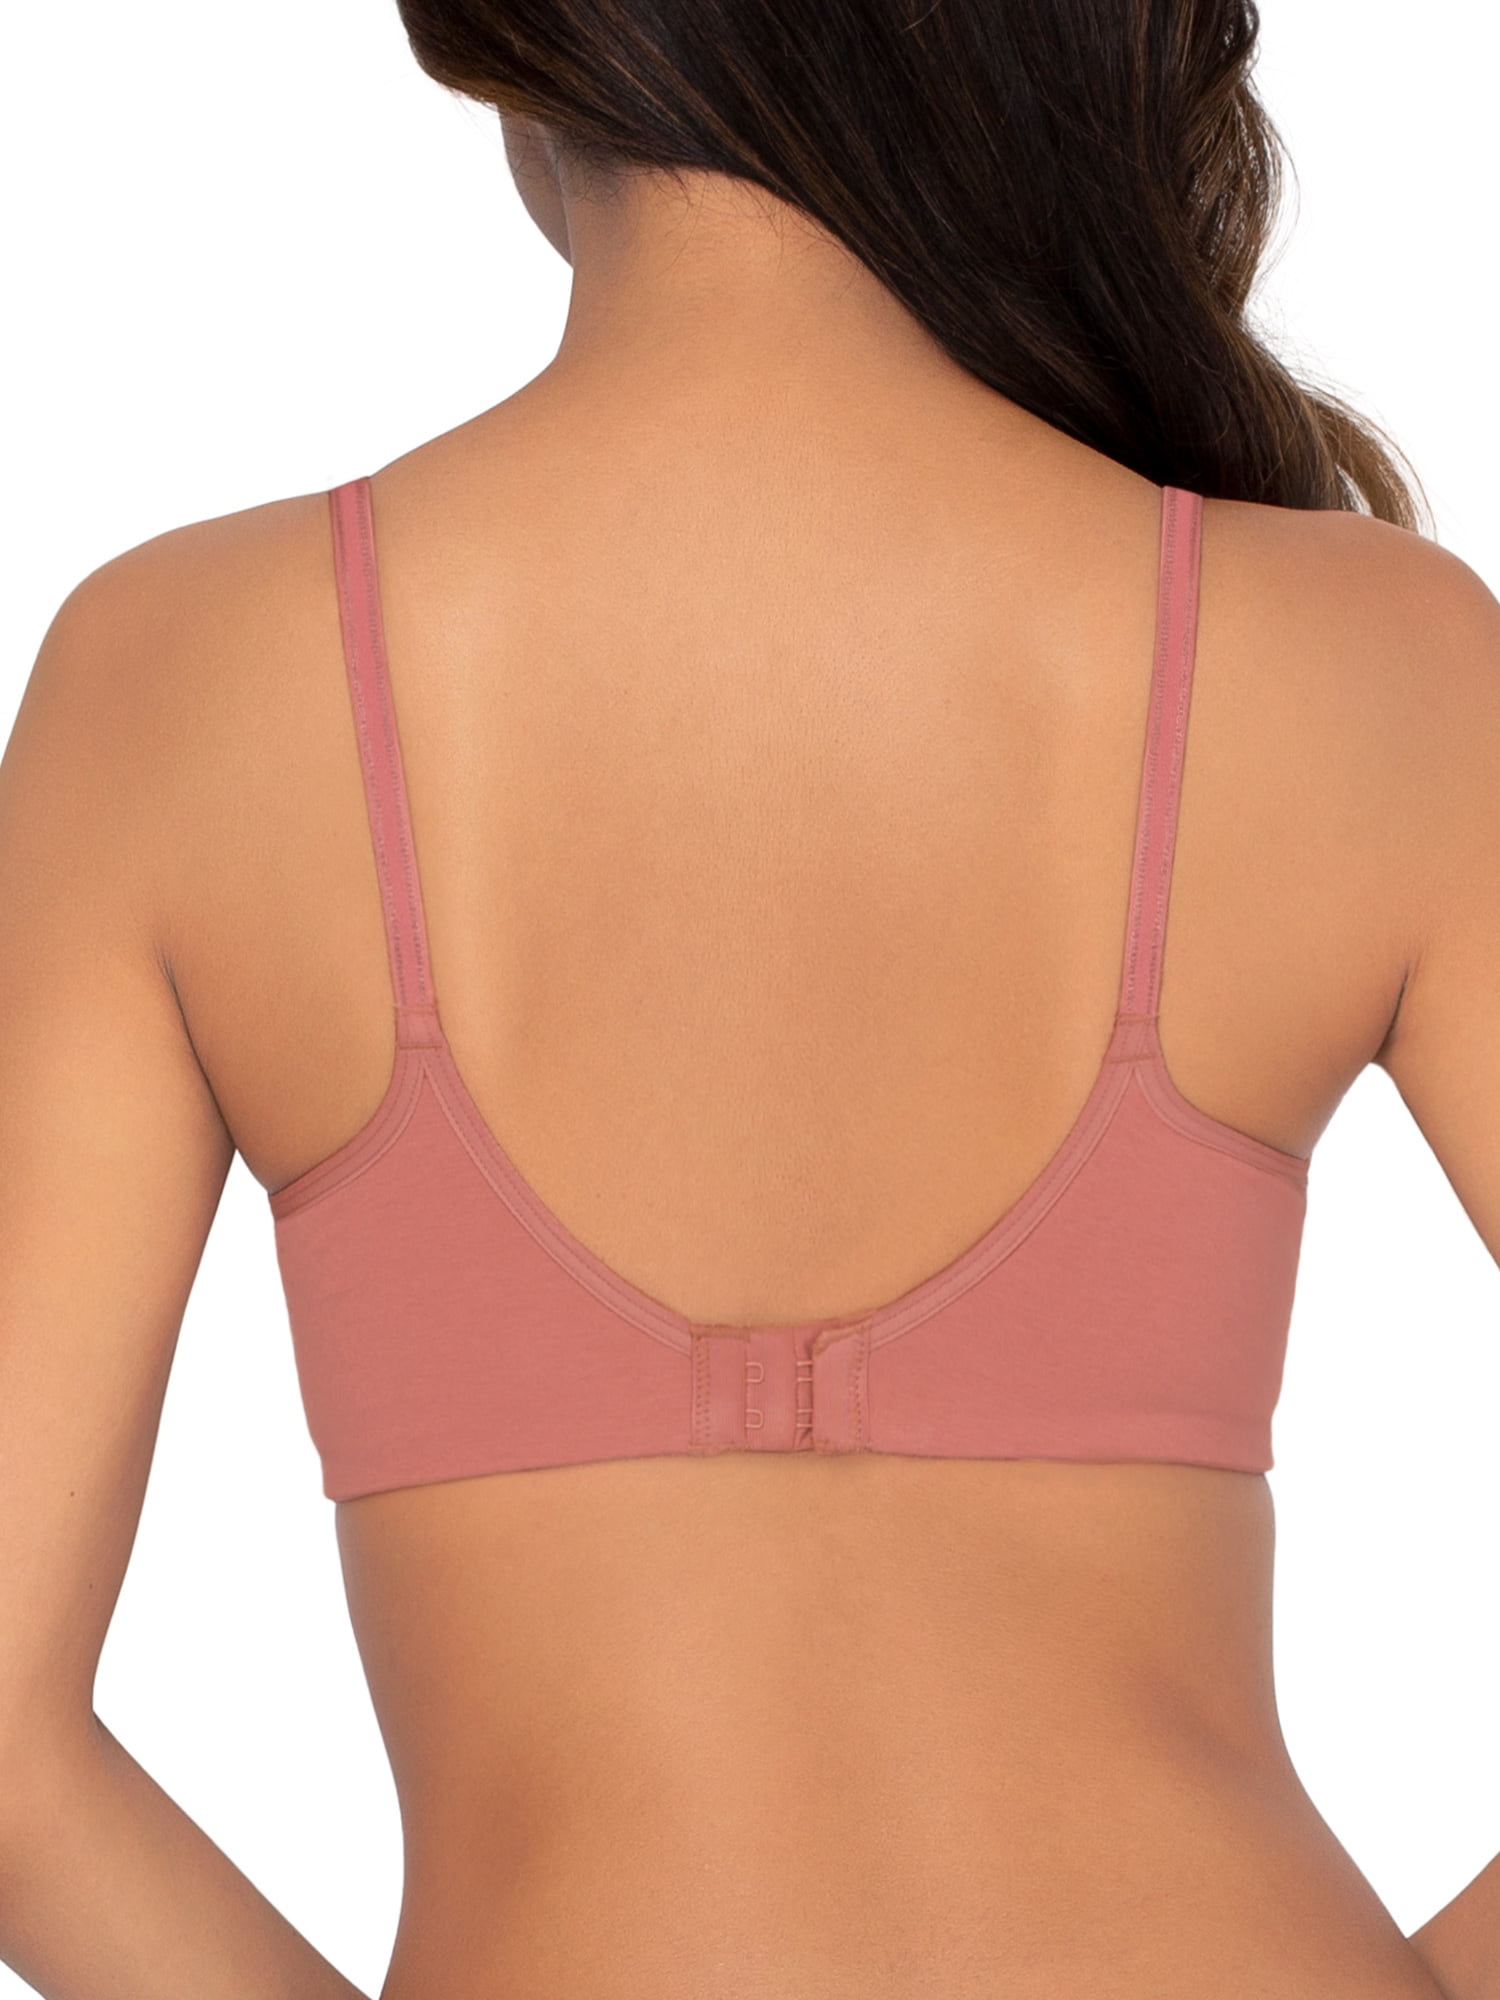 Fruit of the Loom Women's Cotton Stretch Extreme Comfort Bra FT920